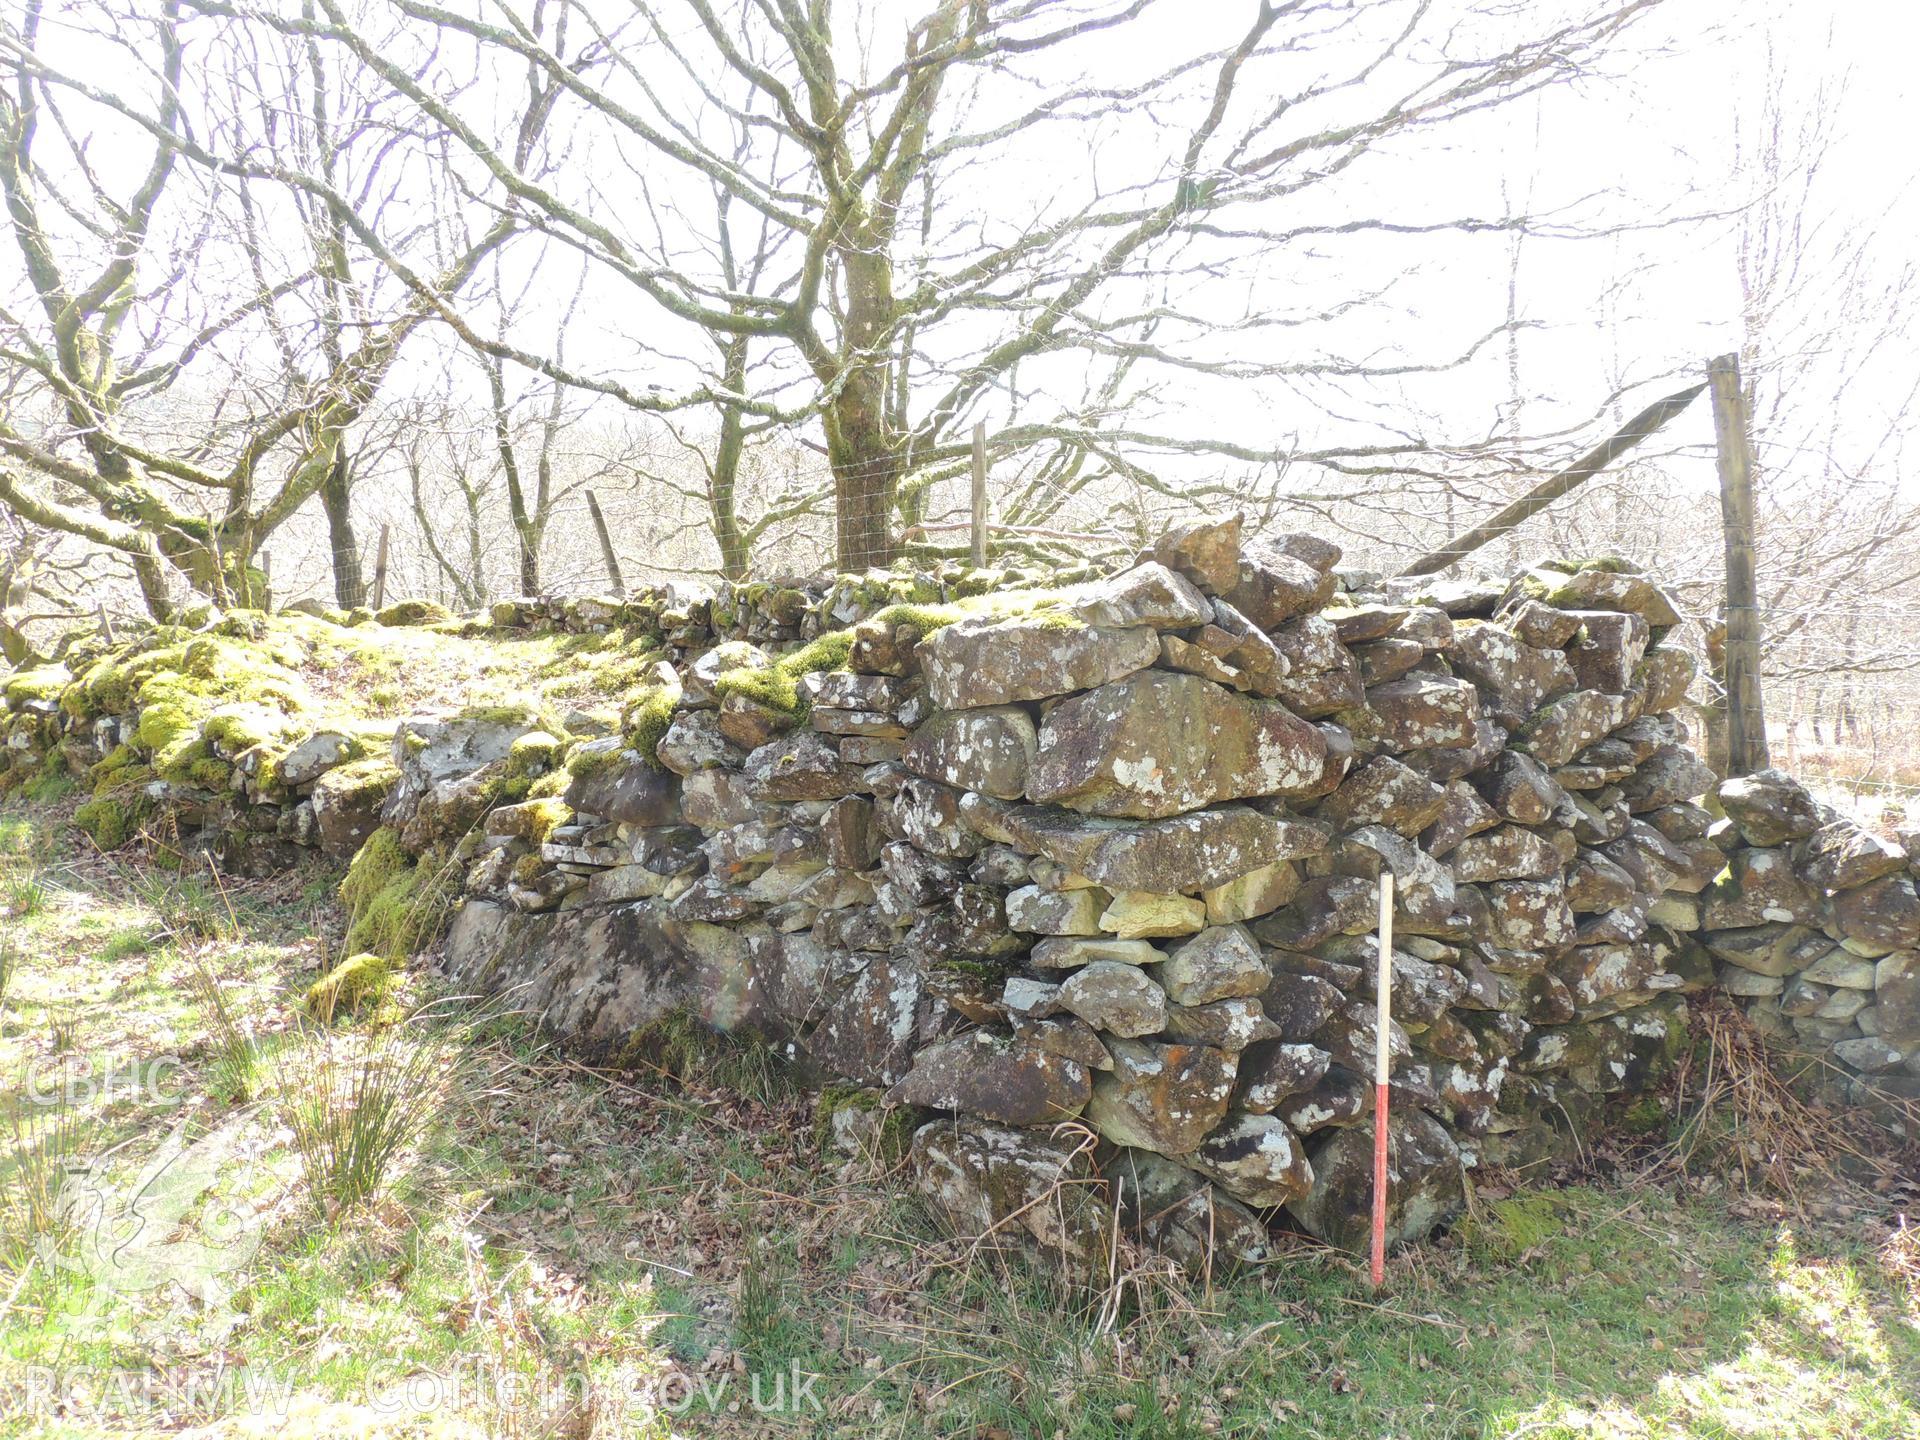 'Remains of structure, possibly sheep fold. Oblique view.' Photographed as part of desk based assessment and heritage impact assessment of a hydro scheme on the Afon Croesor, Brondanw Estate, Gwynedd. Produced by Archaeology Wales, 2018.